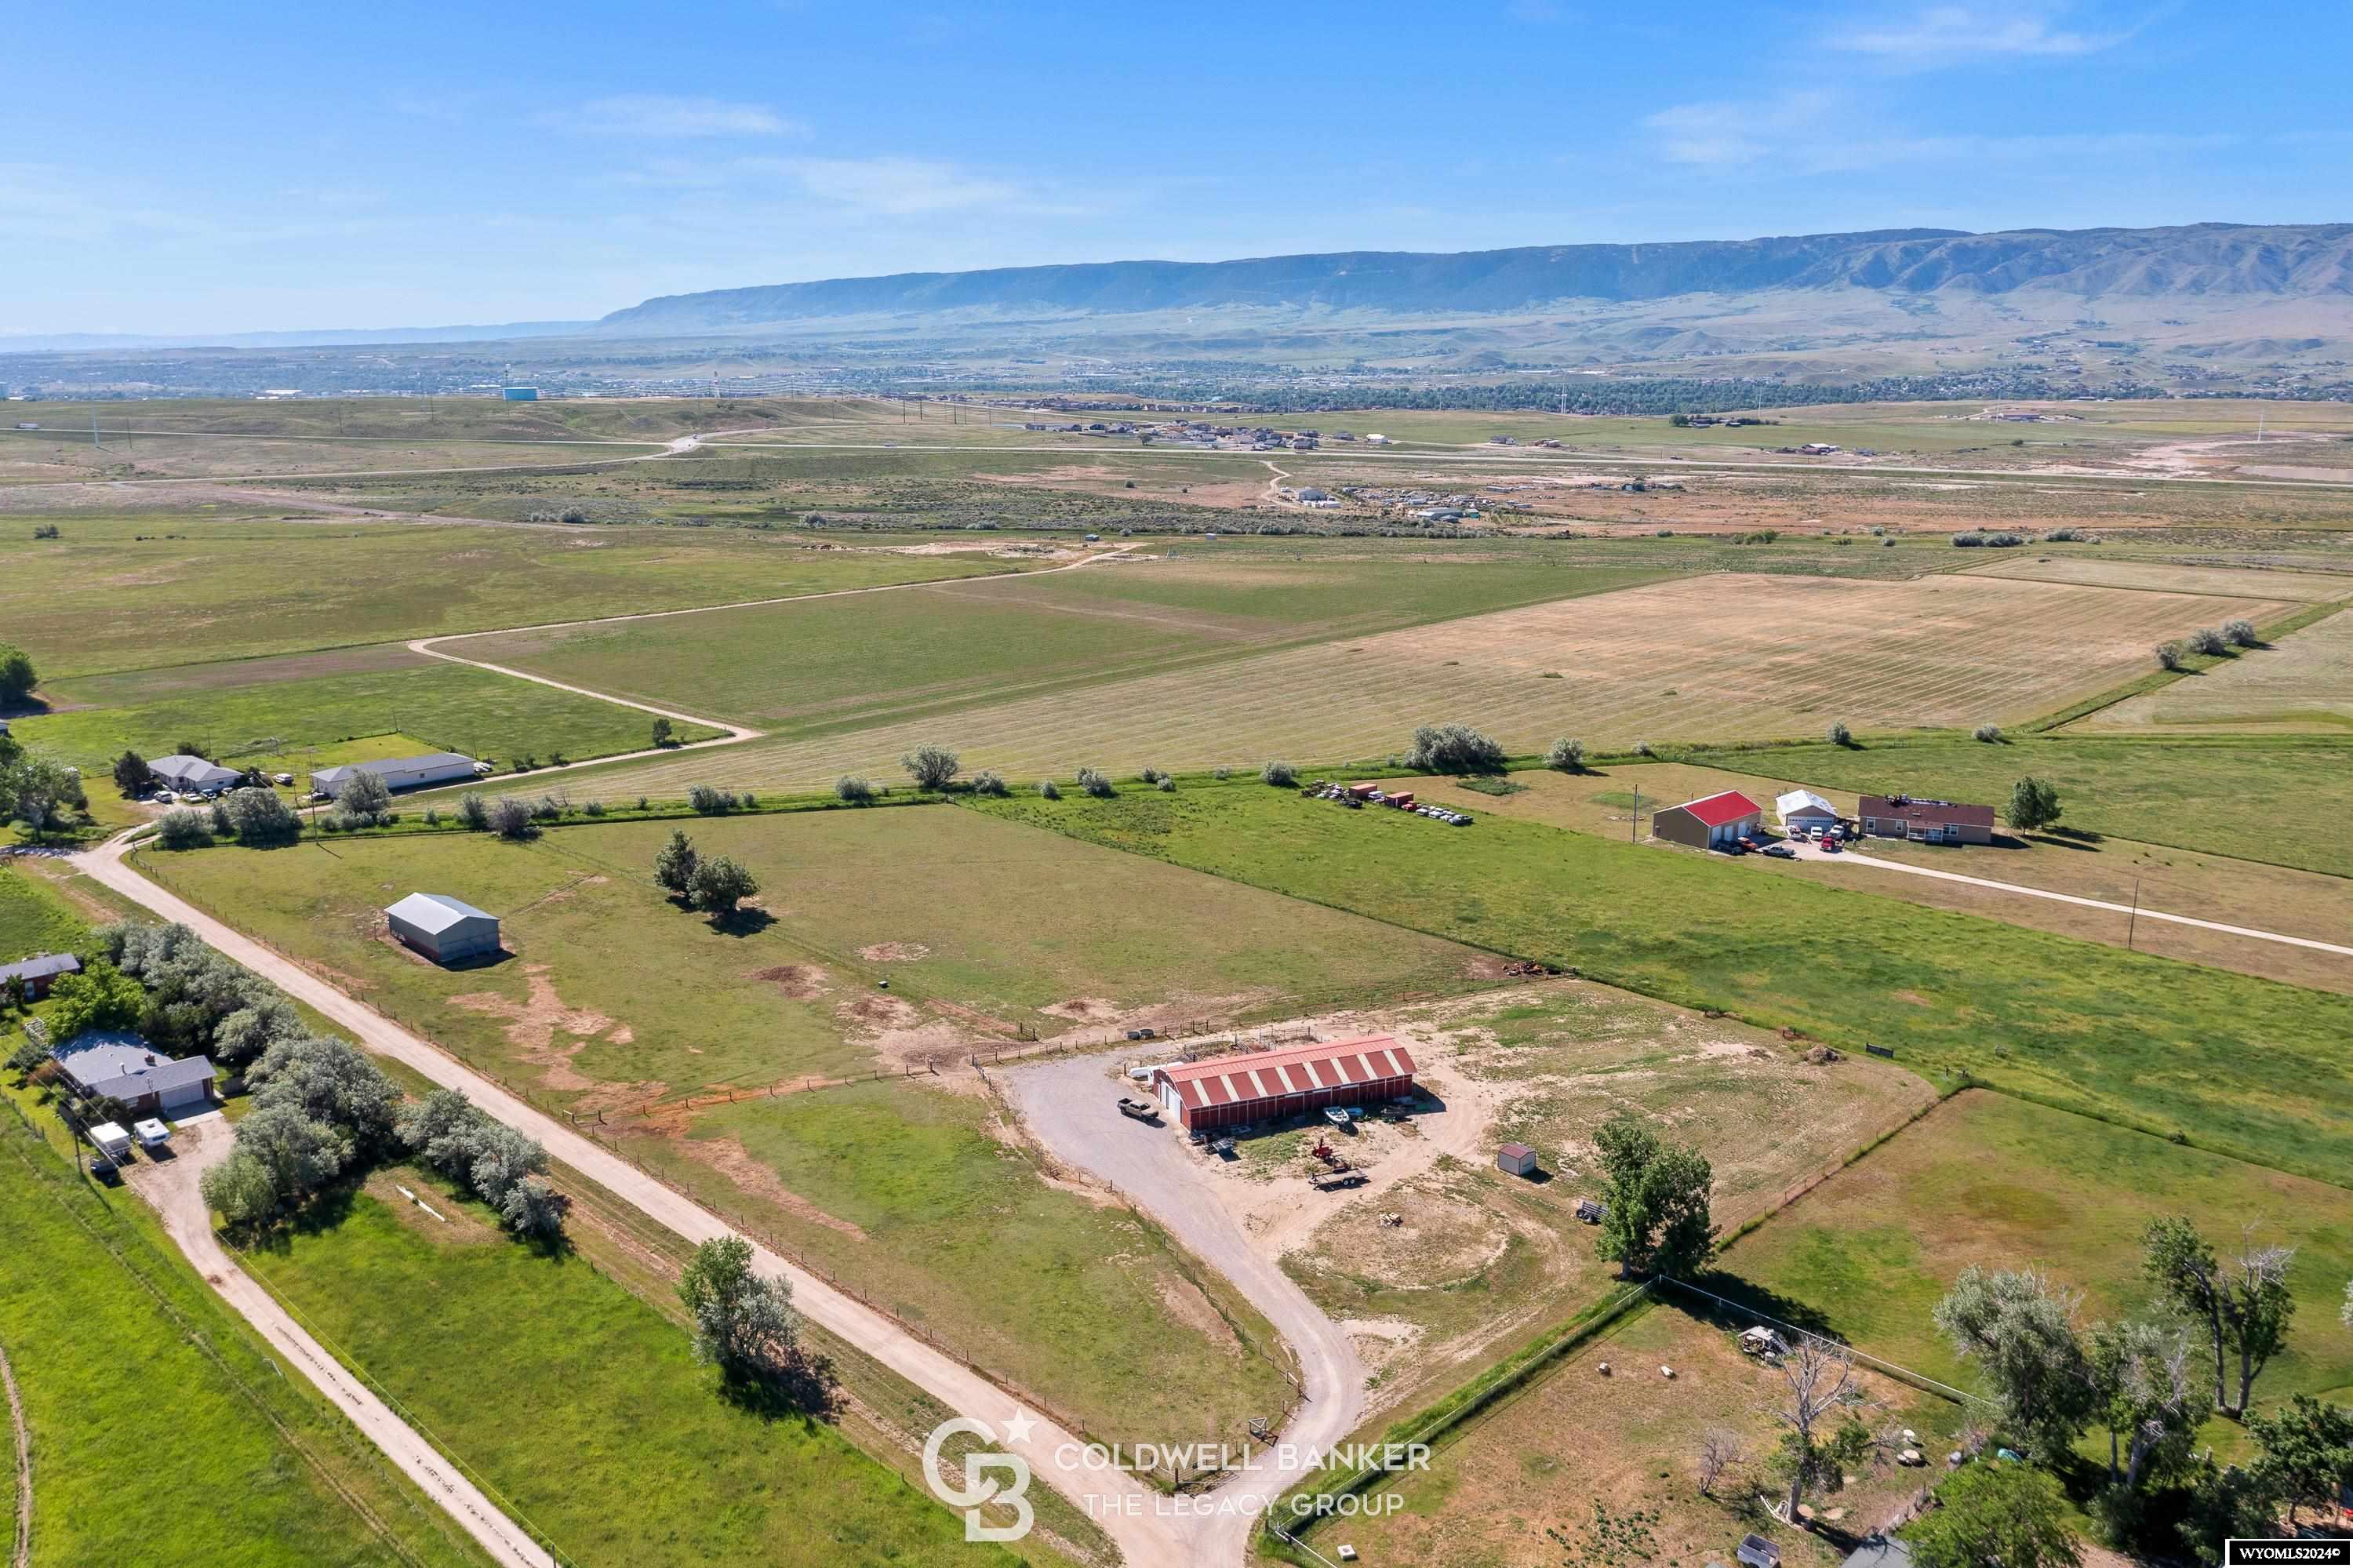 Lots of untapped potential in this beautiful and quiet piece of land only 10 min from downtown! An exquisite building site with expansive mountain views and privacy from any neighbors. The parcel is currently under center pivot irrigation producing grass and alfalfa hay. The 42'x108' barn features 8 fully equipped horse stalls, two hay lofts, and a large tack room. The property could also be developed into separate residential lots and has 4 water taps available. Call Quinn at 307.399.0744